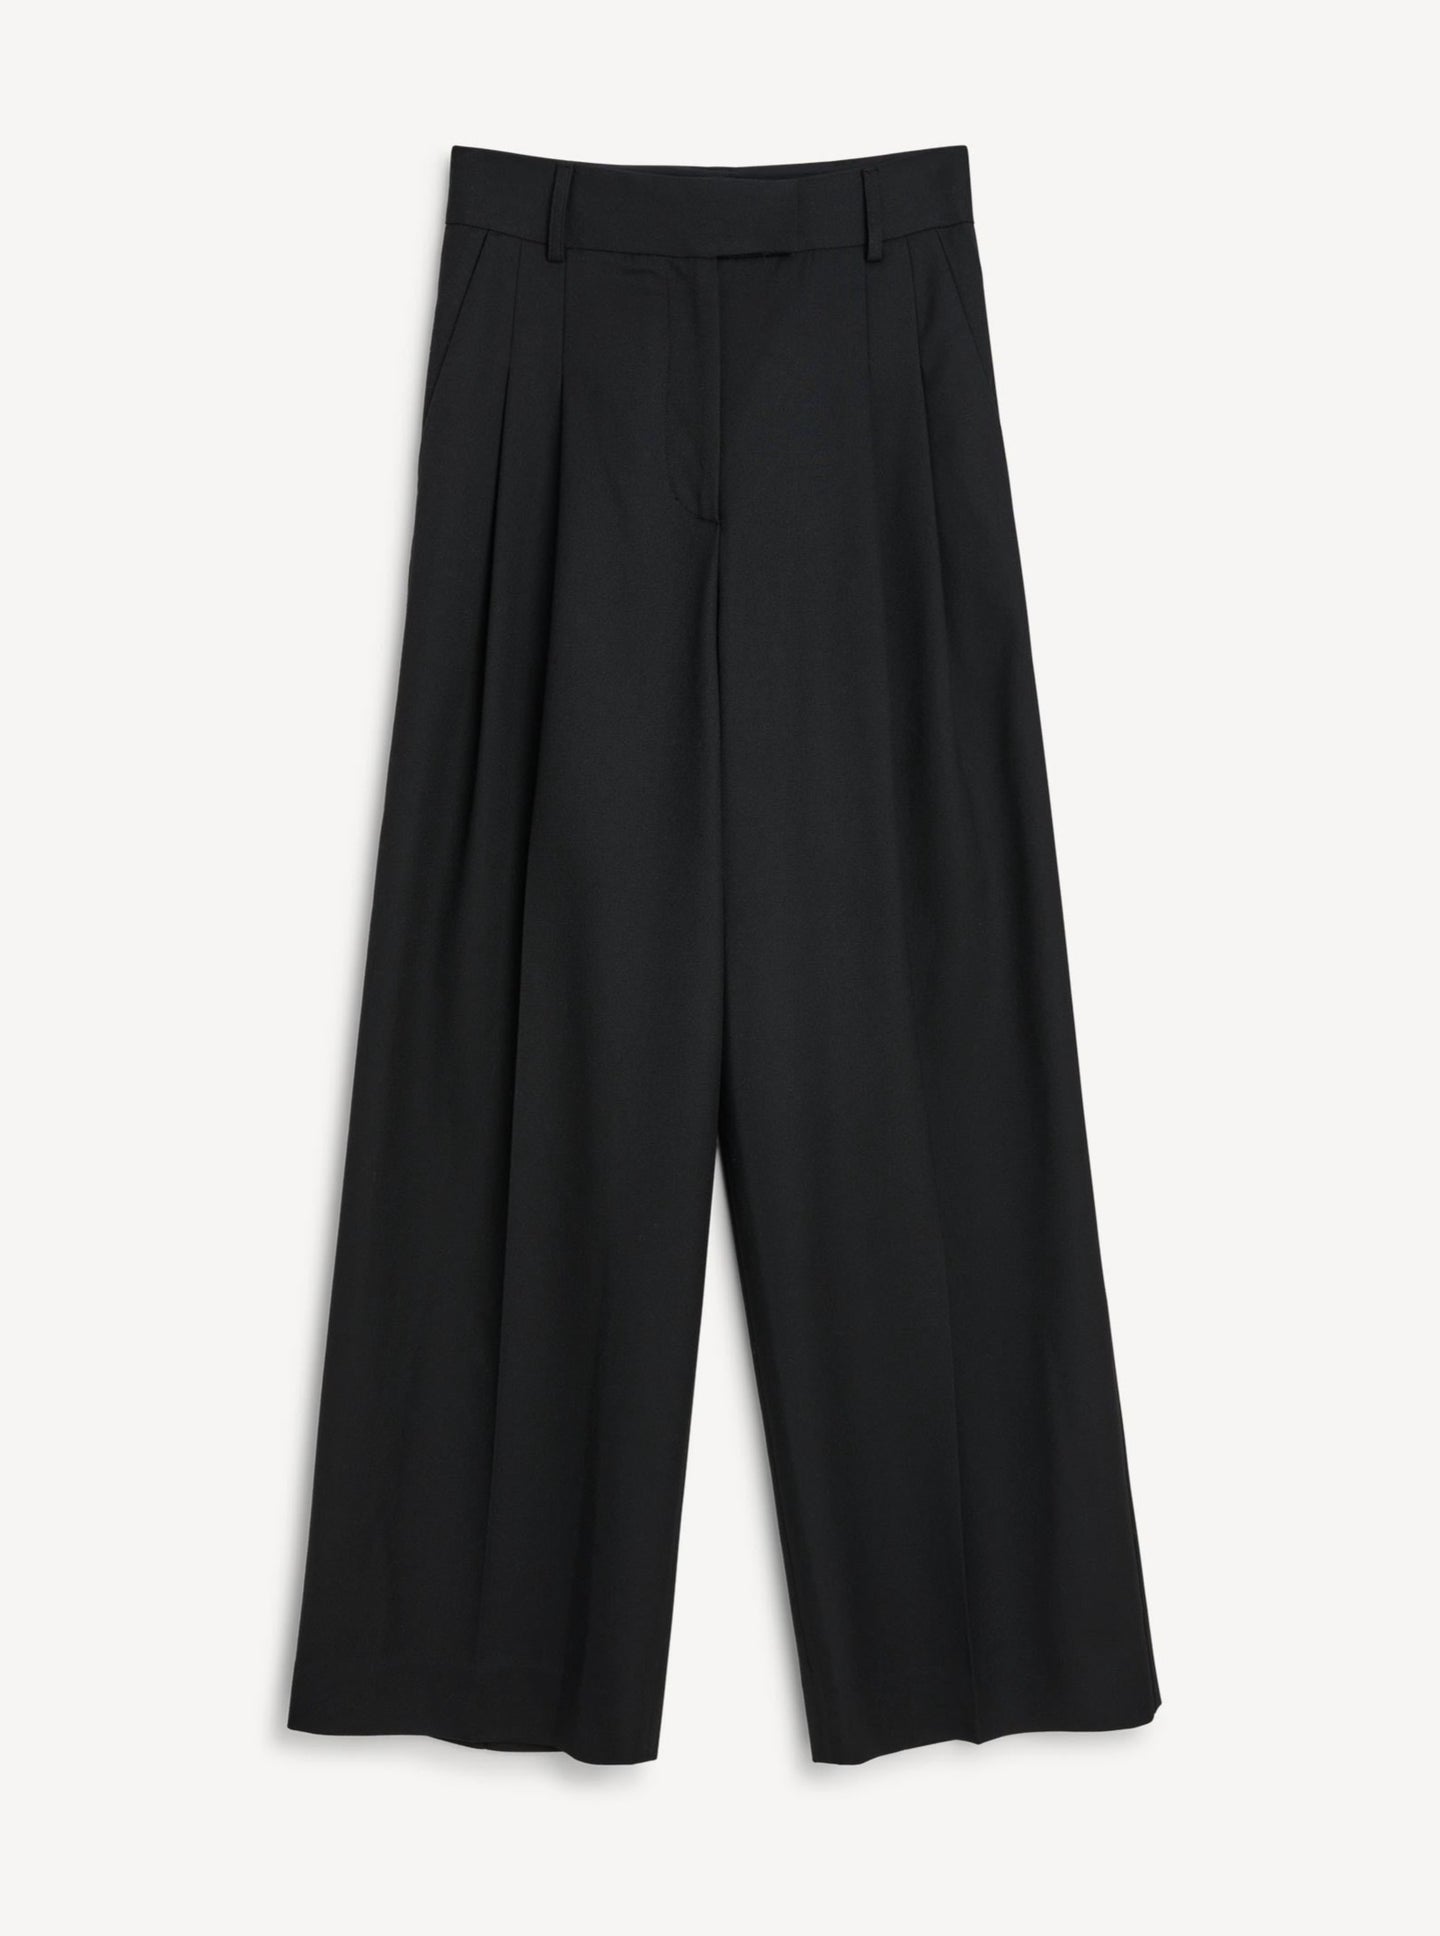 CYMBARIA HIGH WAIST WIDE TROUSERS | BLACK FROM BY MALENE BIRGER